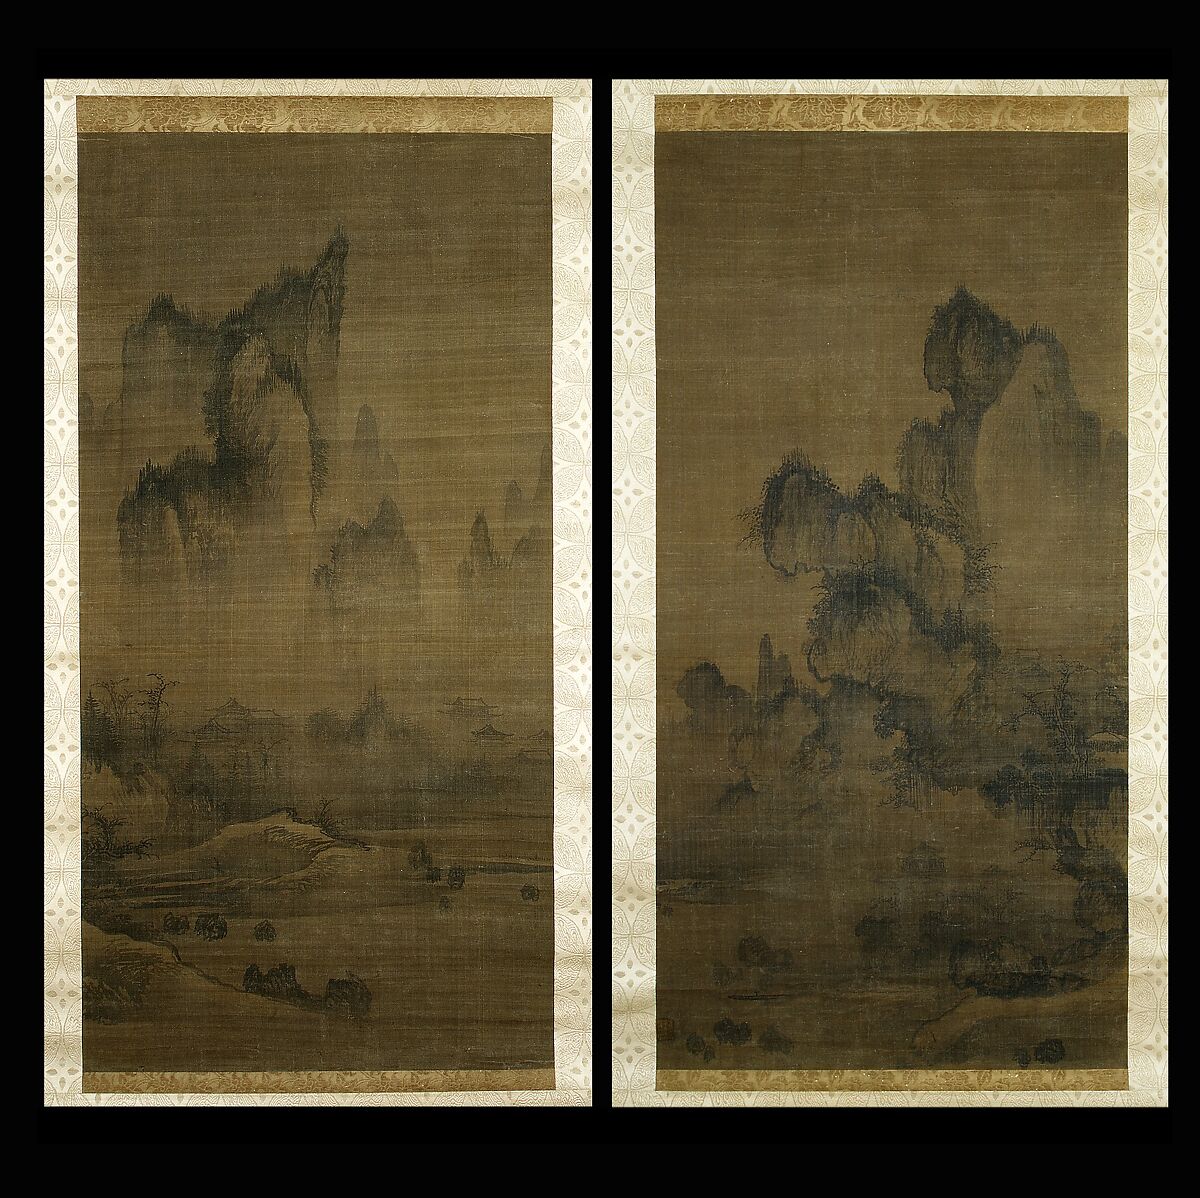 Evening bell from mist-shrouded temple (left); Autumn moon over Lake Dongting (right), Style of An Gyeon (Korean), Pair of hanging scrolls; ink on silk, Korea 